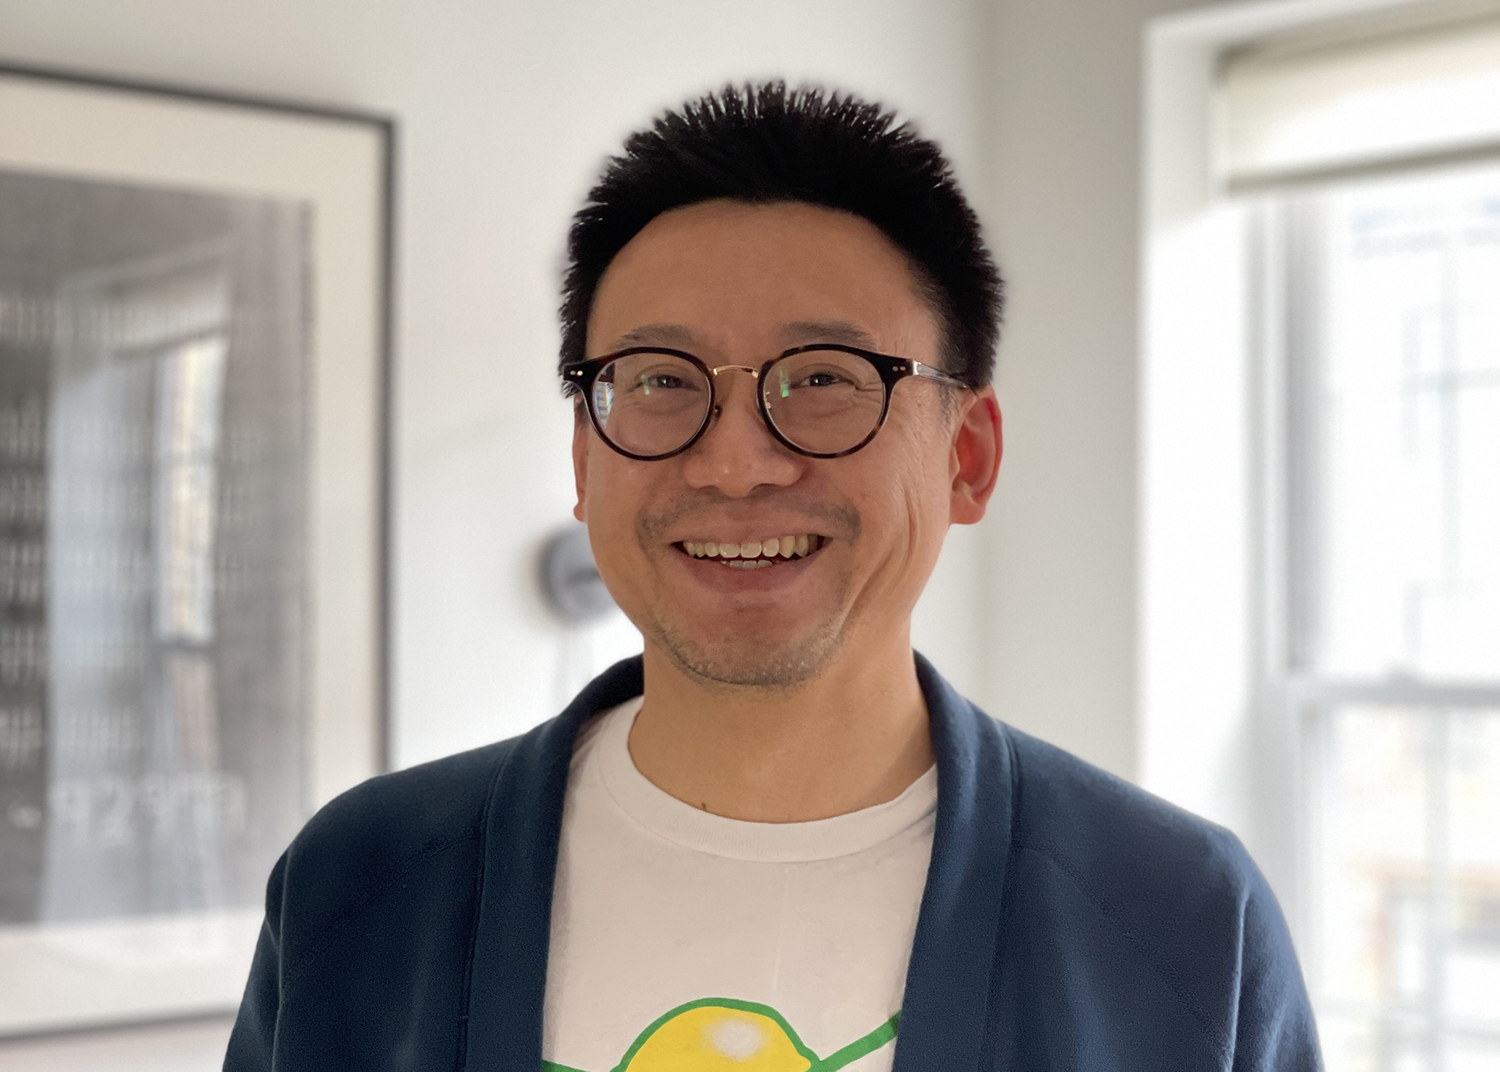 Hua Hsu Joins the Bard College Language and Literature Faculty